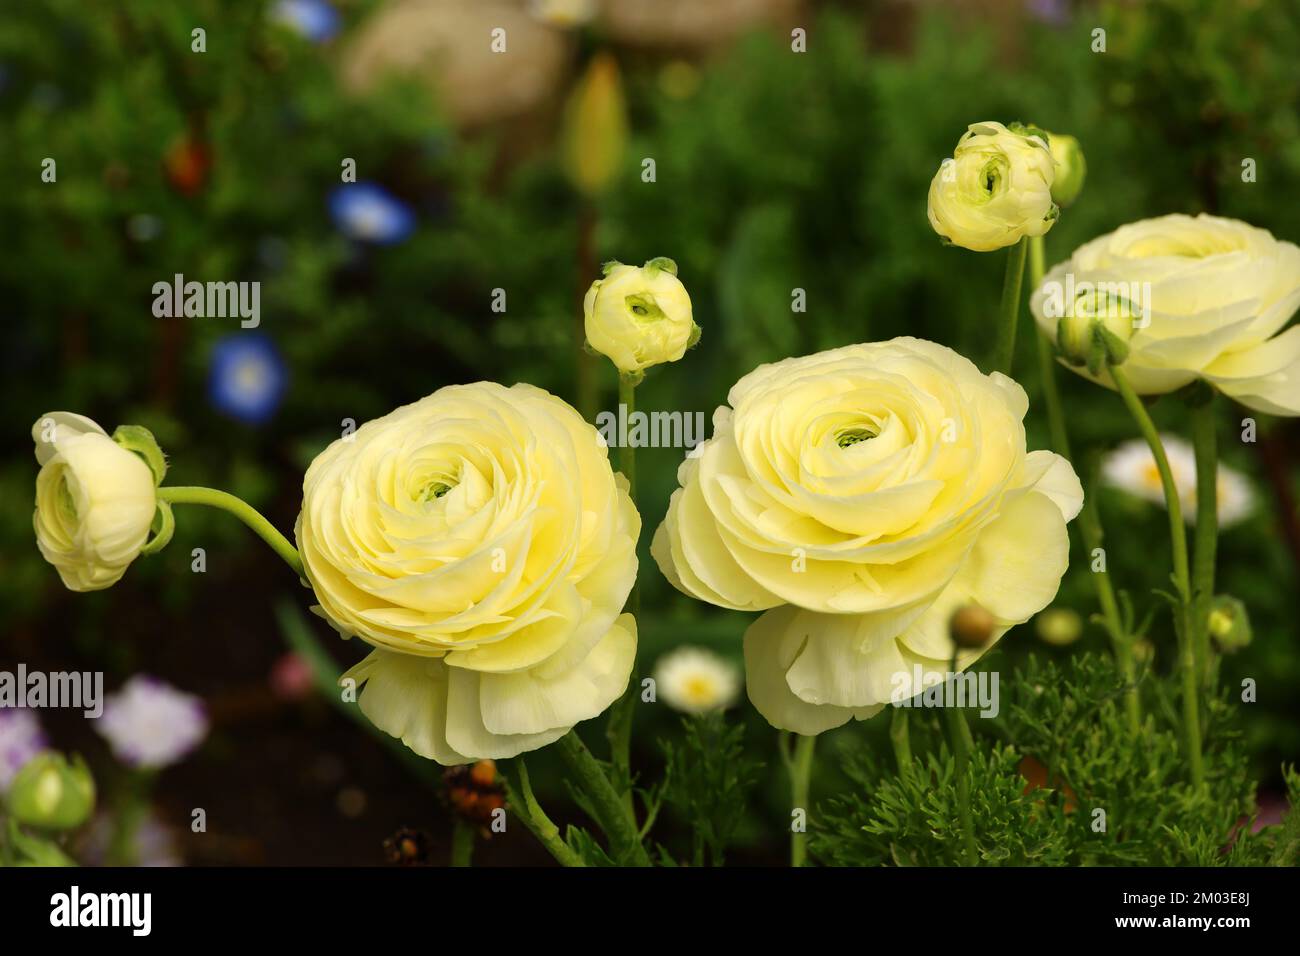 Yellow ranunculus flowers blooming in a flower bed in early spring Stock Photo